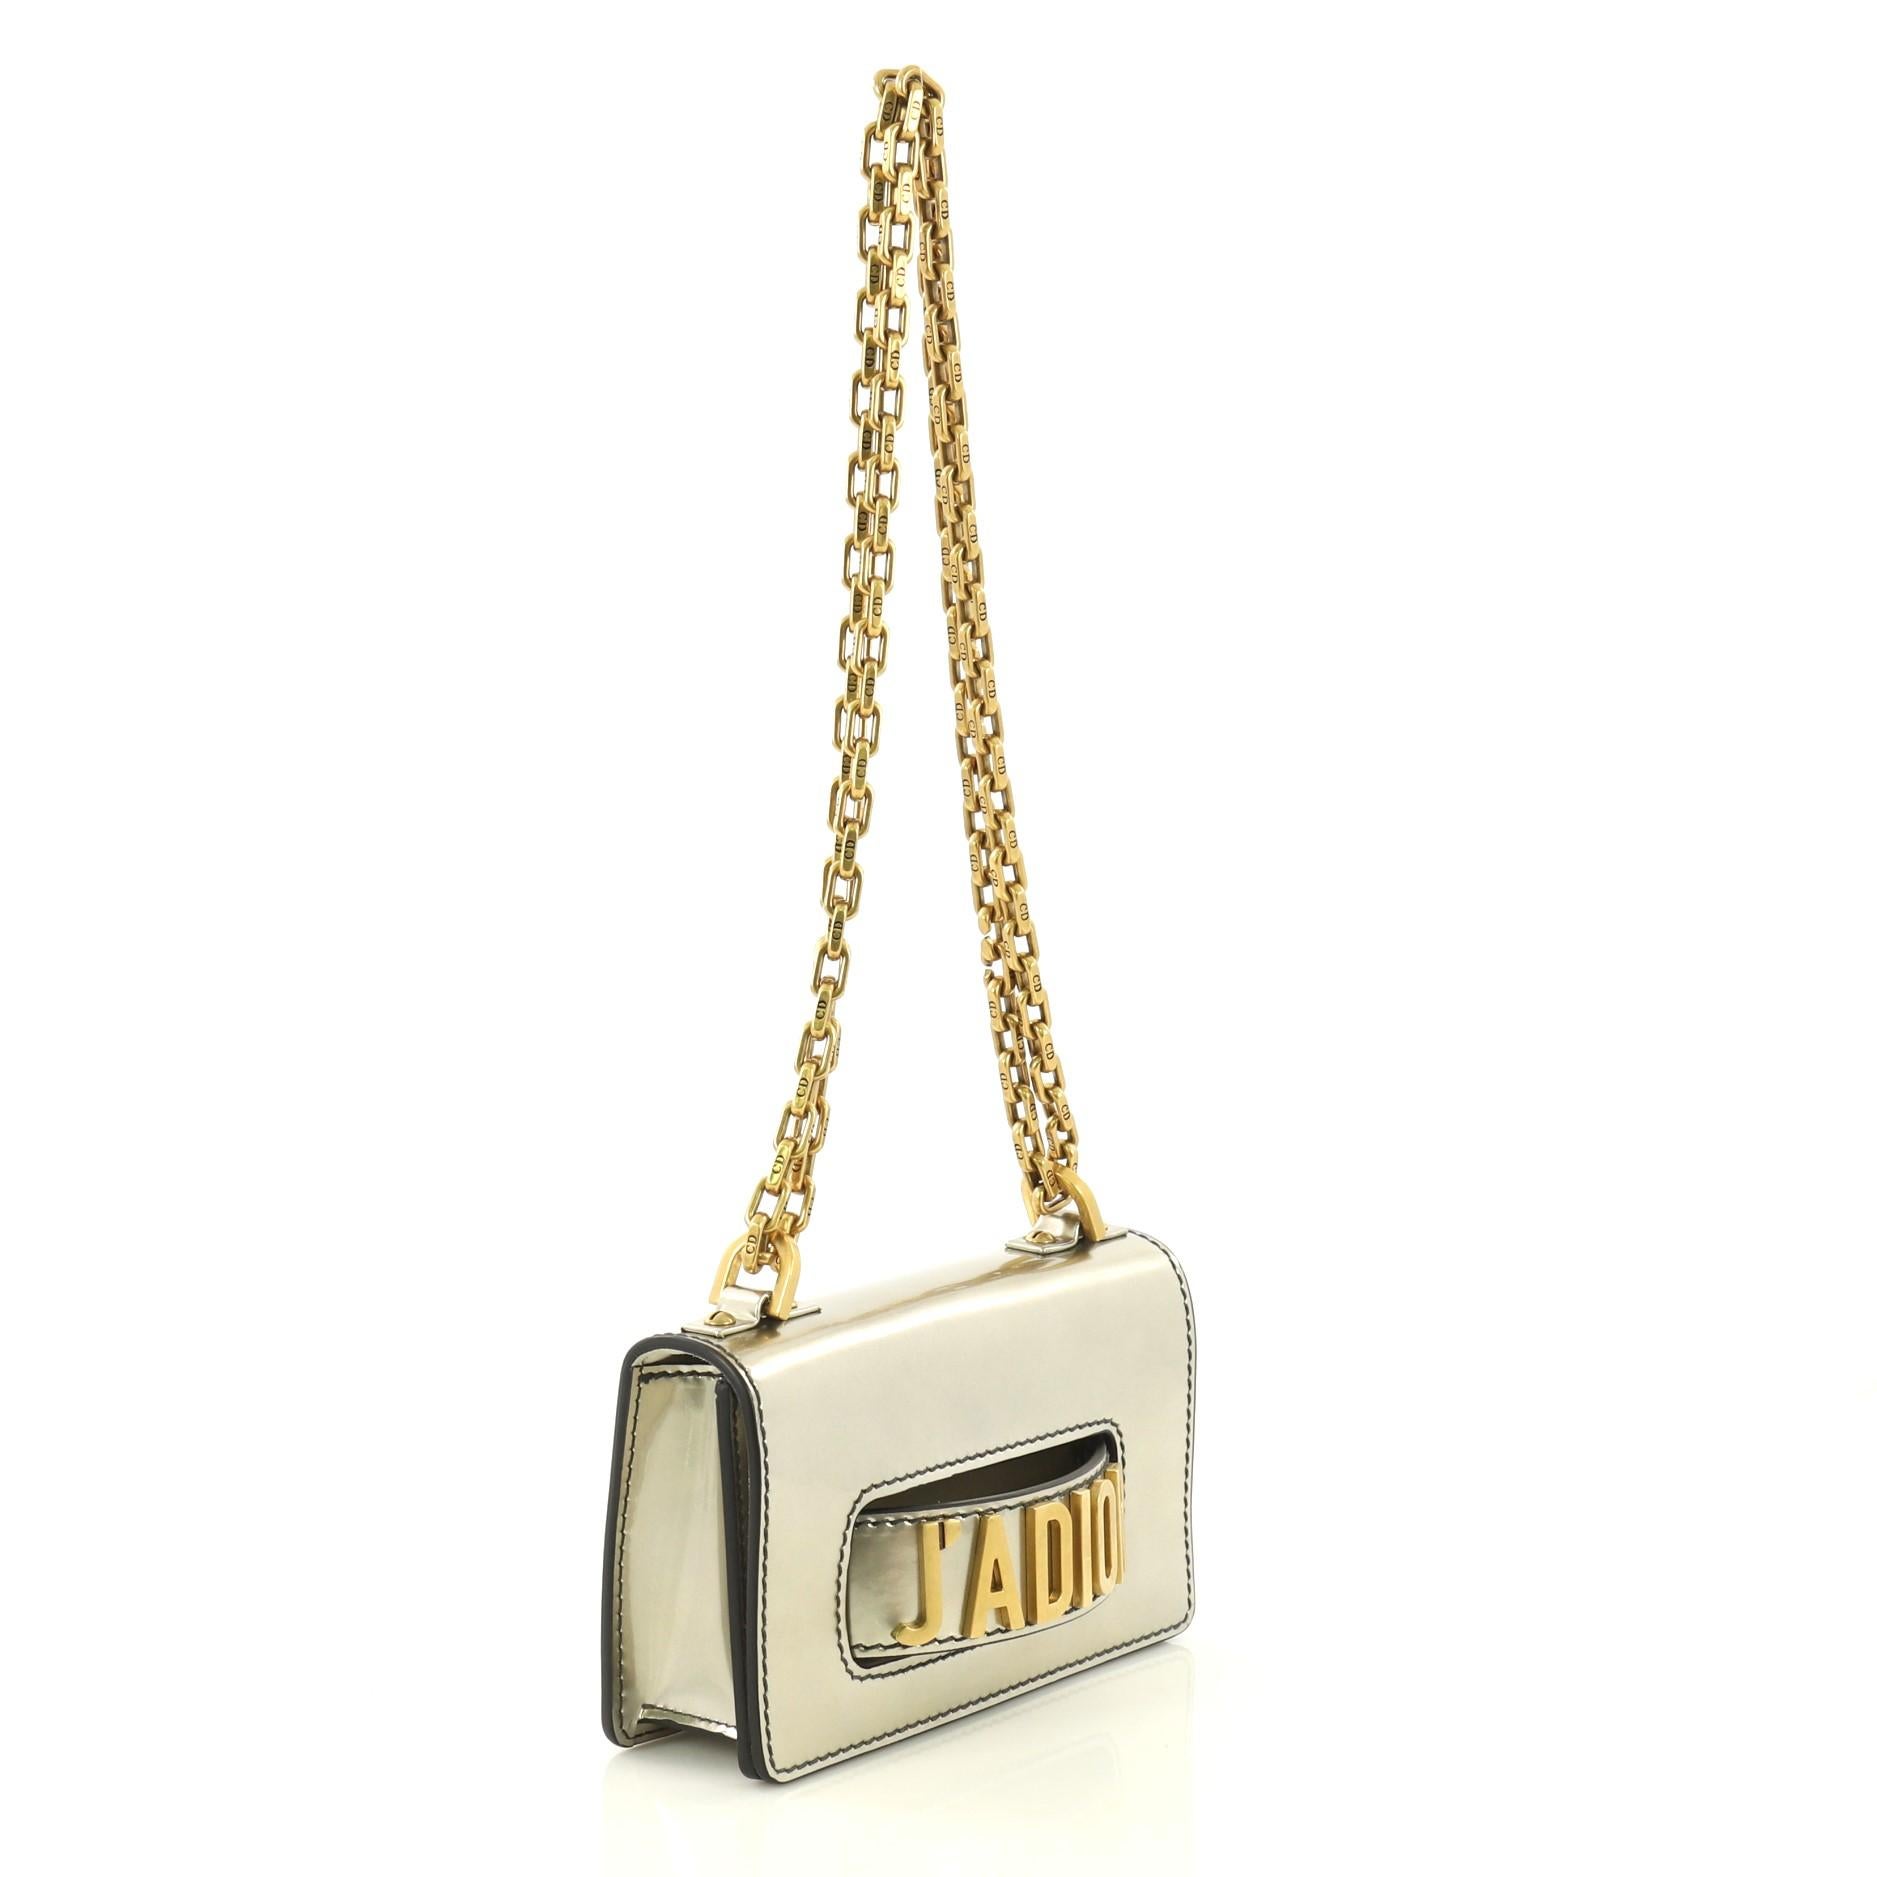 This Christian Dior J'adior Flap Bag Patent Mini, crafted from gold metallic patent leather, features chain link strap, slot handclasp, and aged gold-tone hardware. Its flap opens to a beige suede interior with slip pocket. 

Estimated Retail Price: